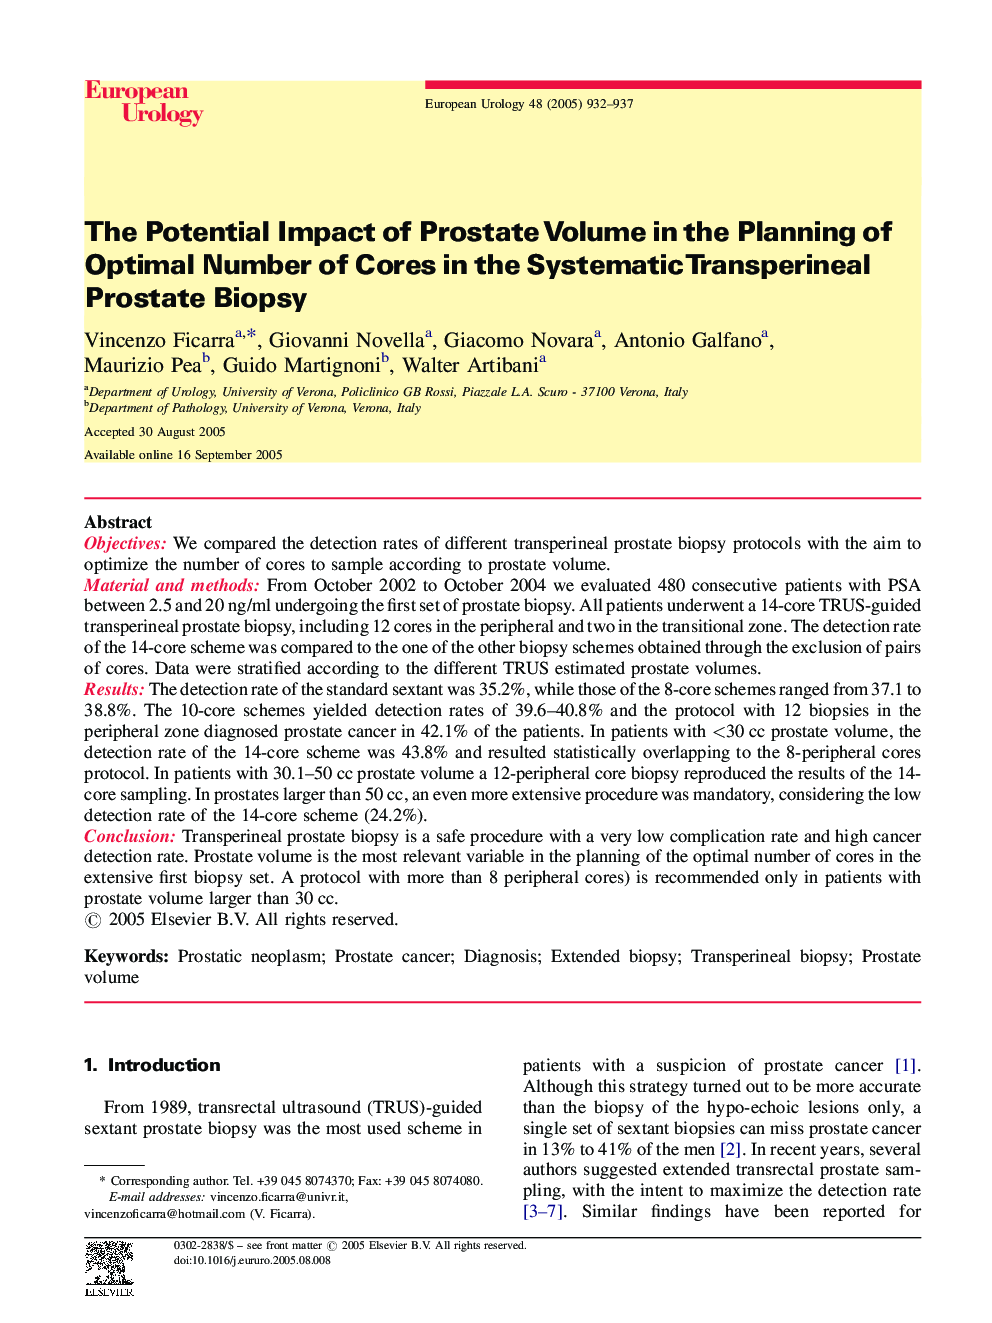 The Potential Impact of Prostate Volume in the Planning of Optimal Number of Cores in the Systematic Transperineal Prostate Biopsy